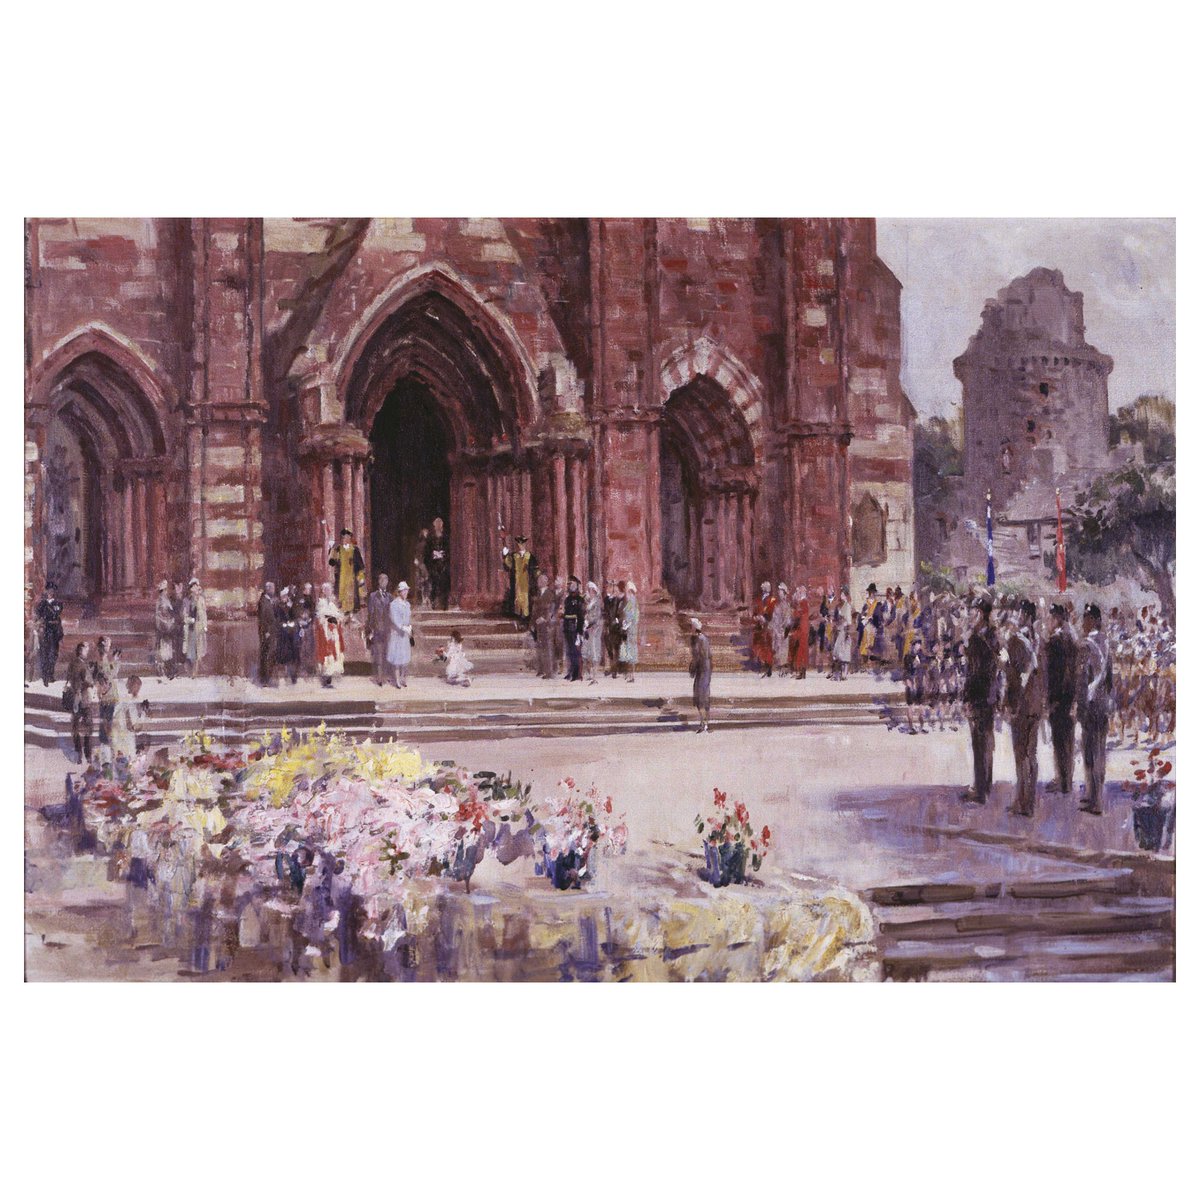 For the letter Q in our #WednesdayWorkoftheWeek here's Stanley Cursiter's Study for the Queen's visit, St Magnus Cathedral 1960 #PierArtsCentre